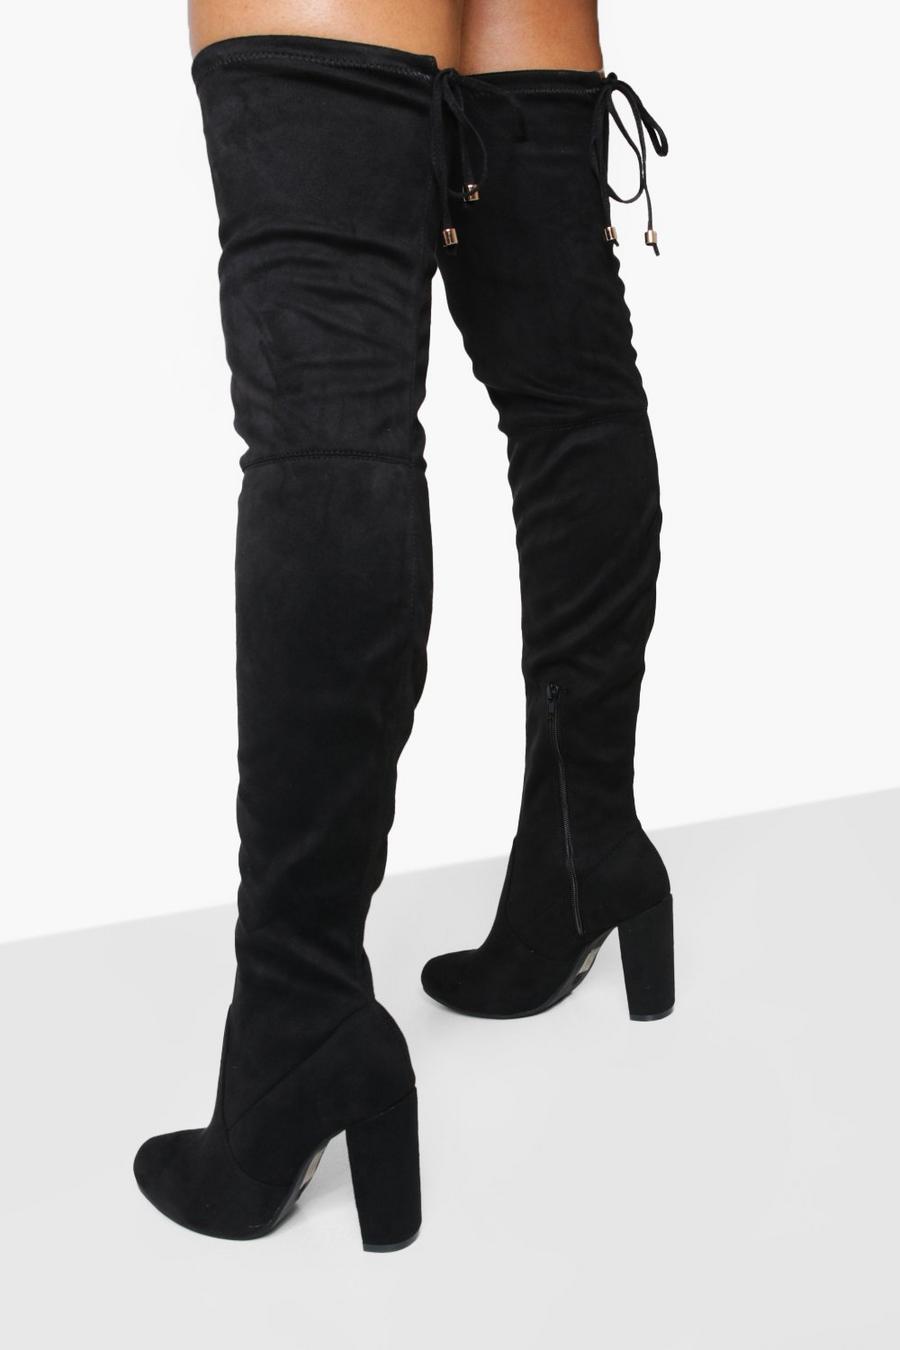 Black Block Heel Tie Back Thigh High Boots image number 1